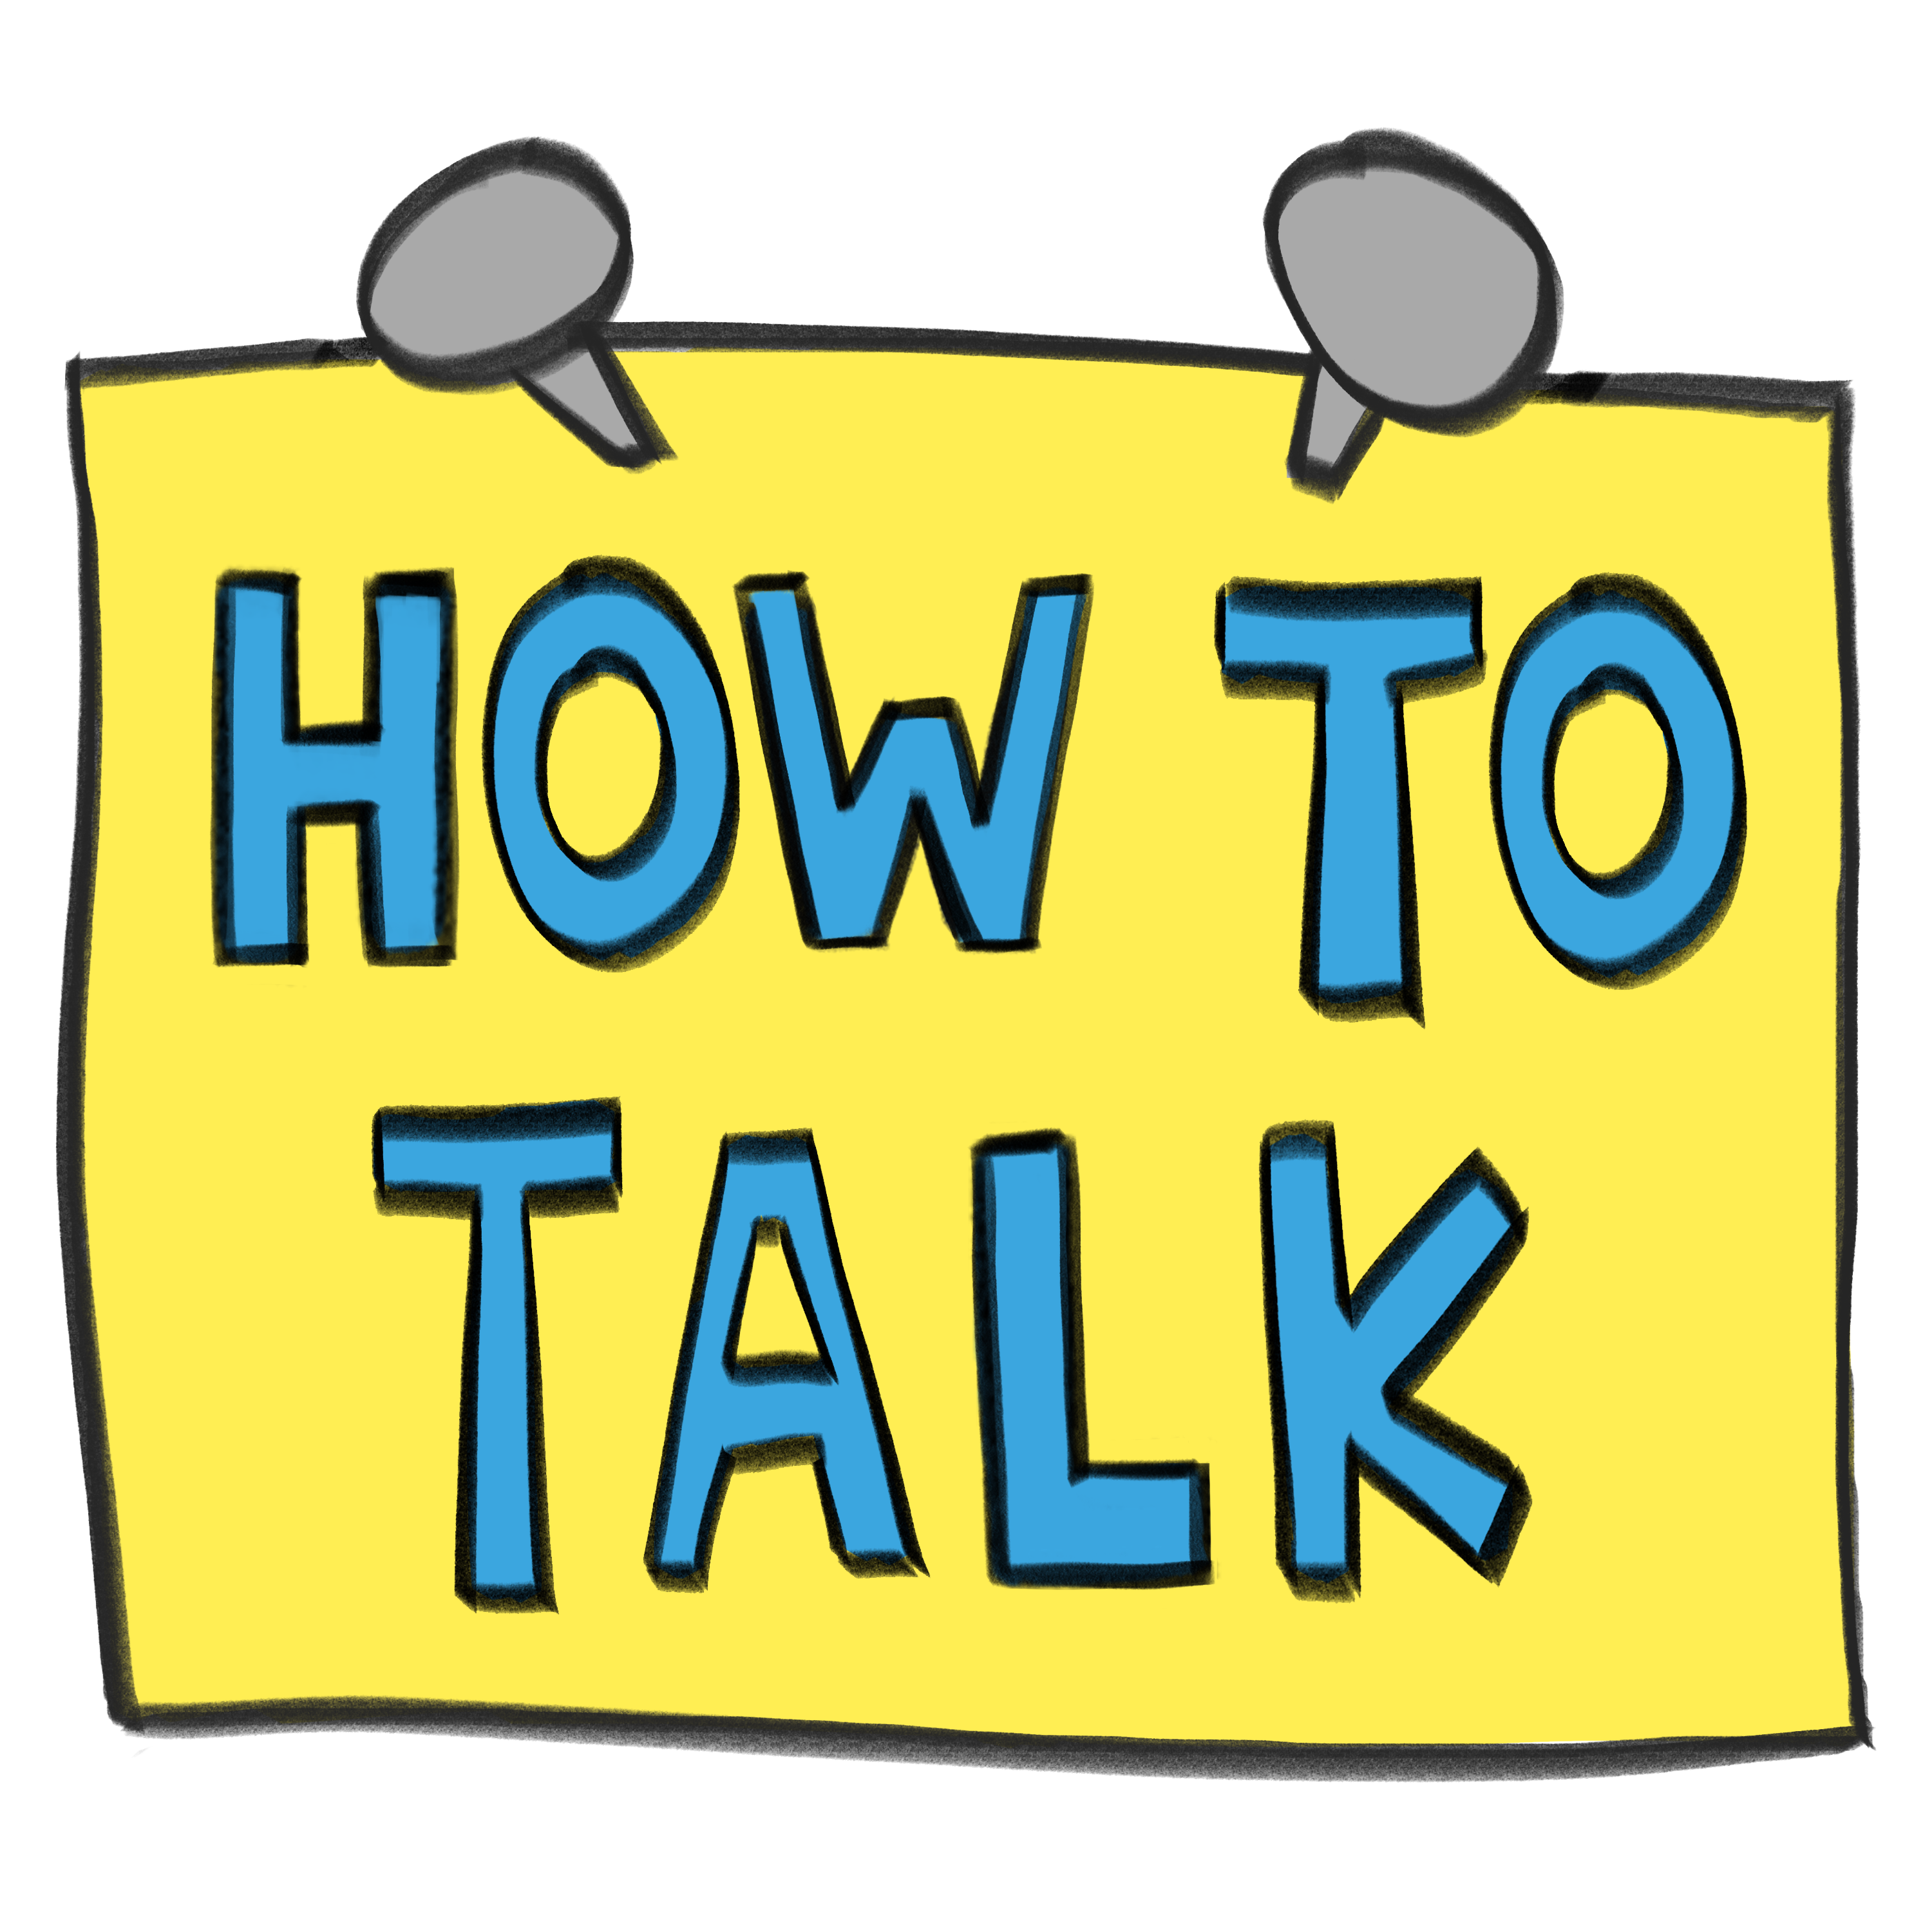 HOW TO TALK app